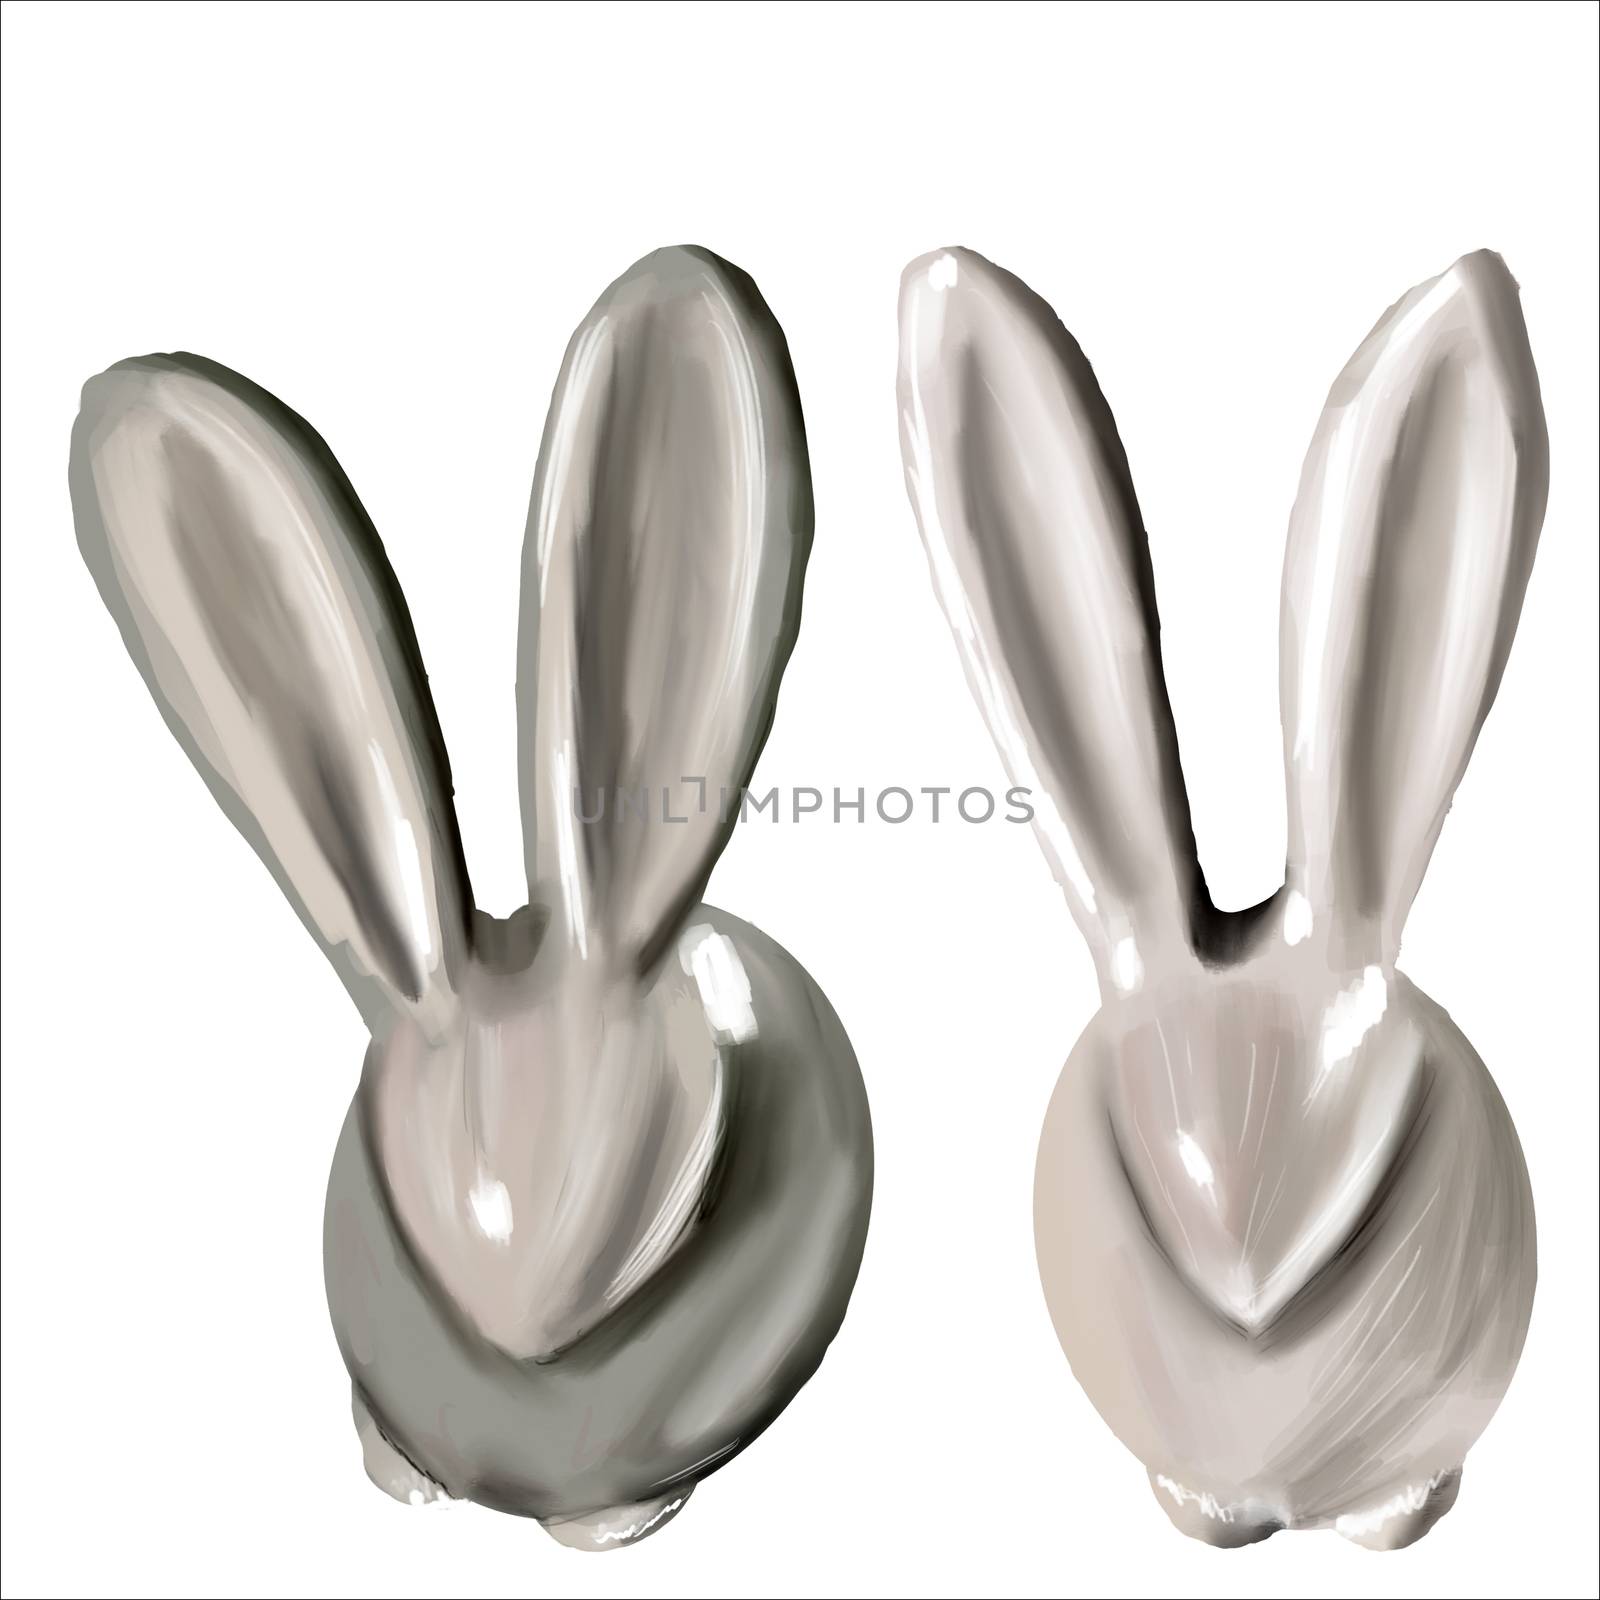 Two ceramic easter bunnies isolated on white background. by Nata_Prando